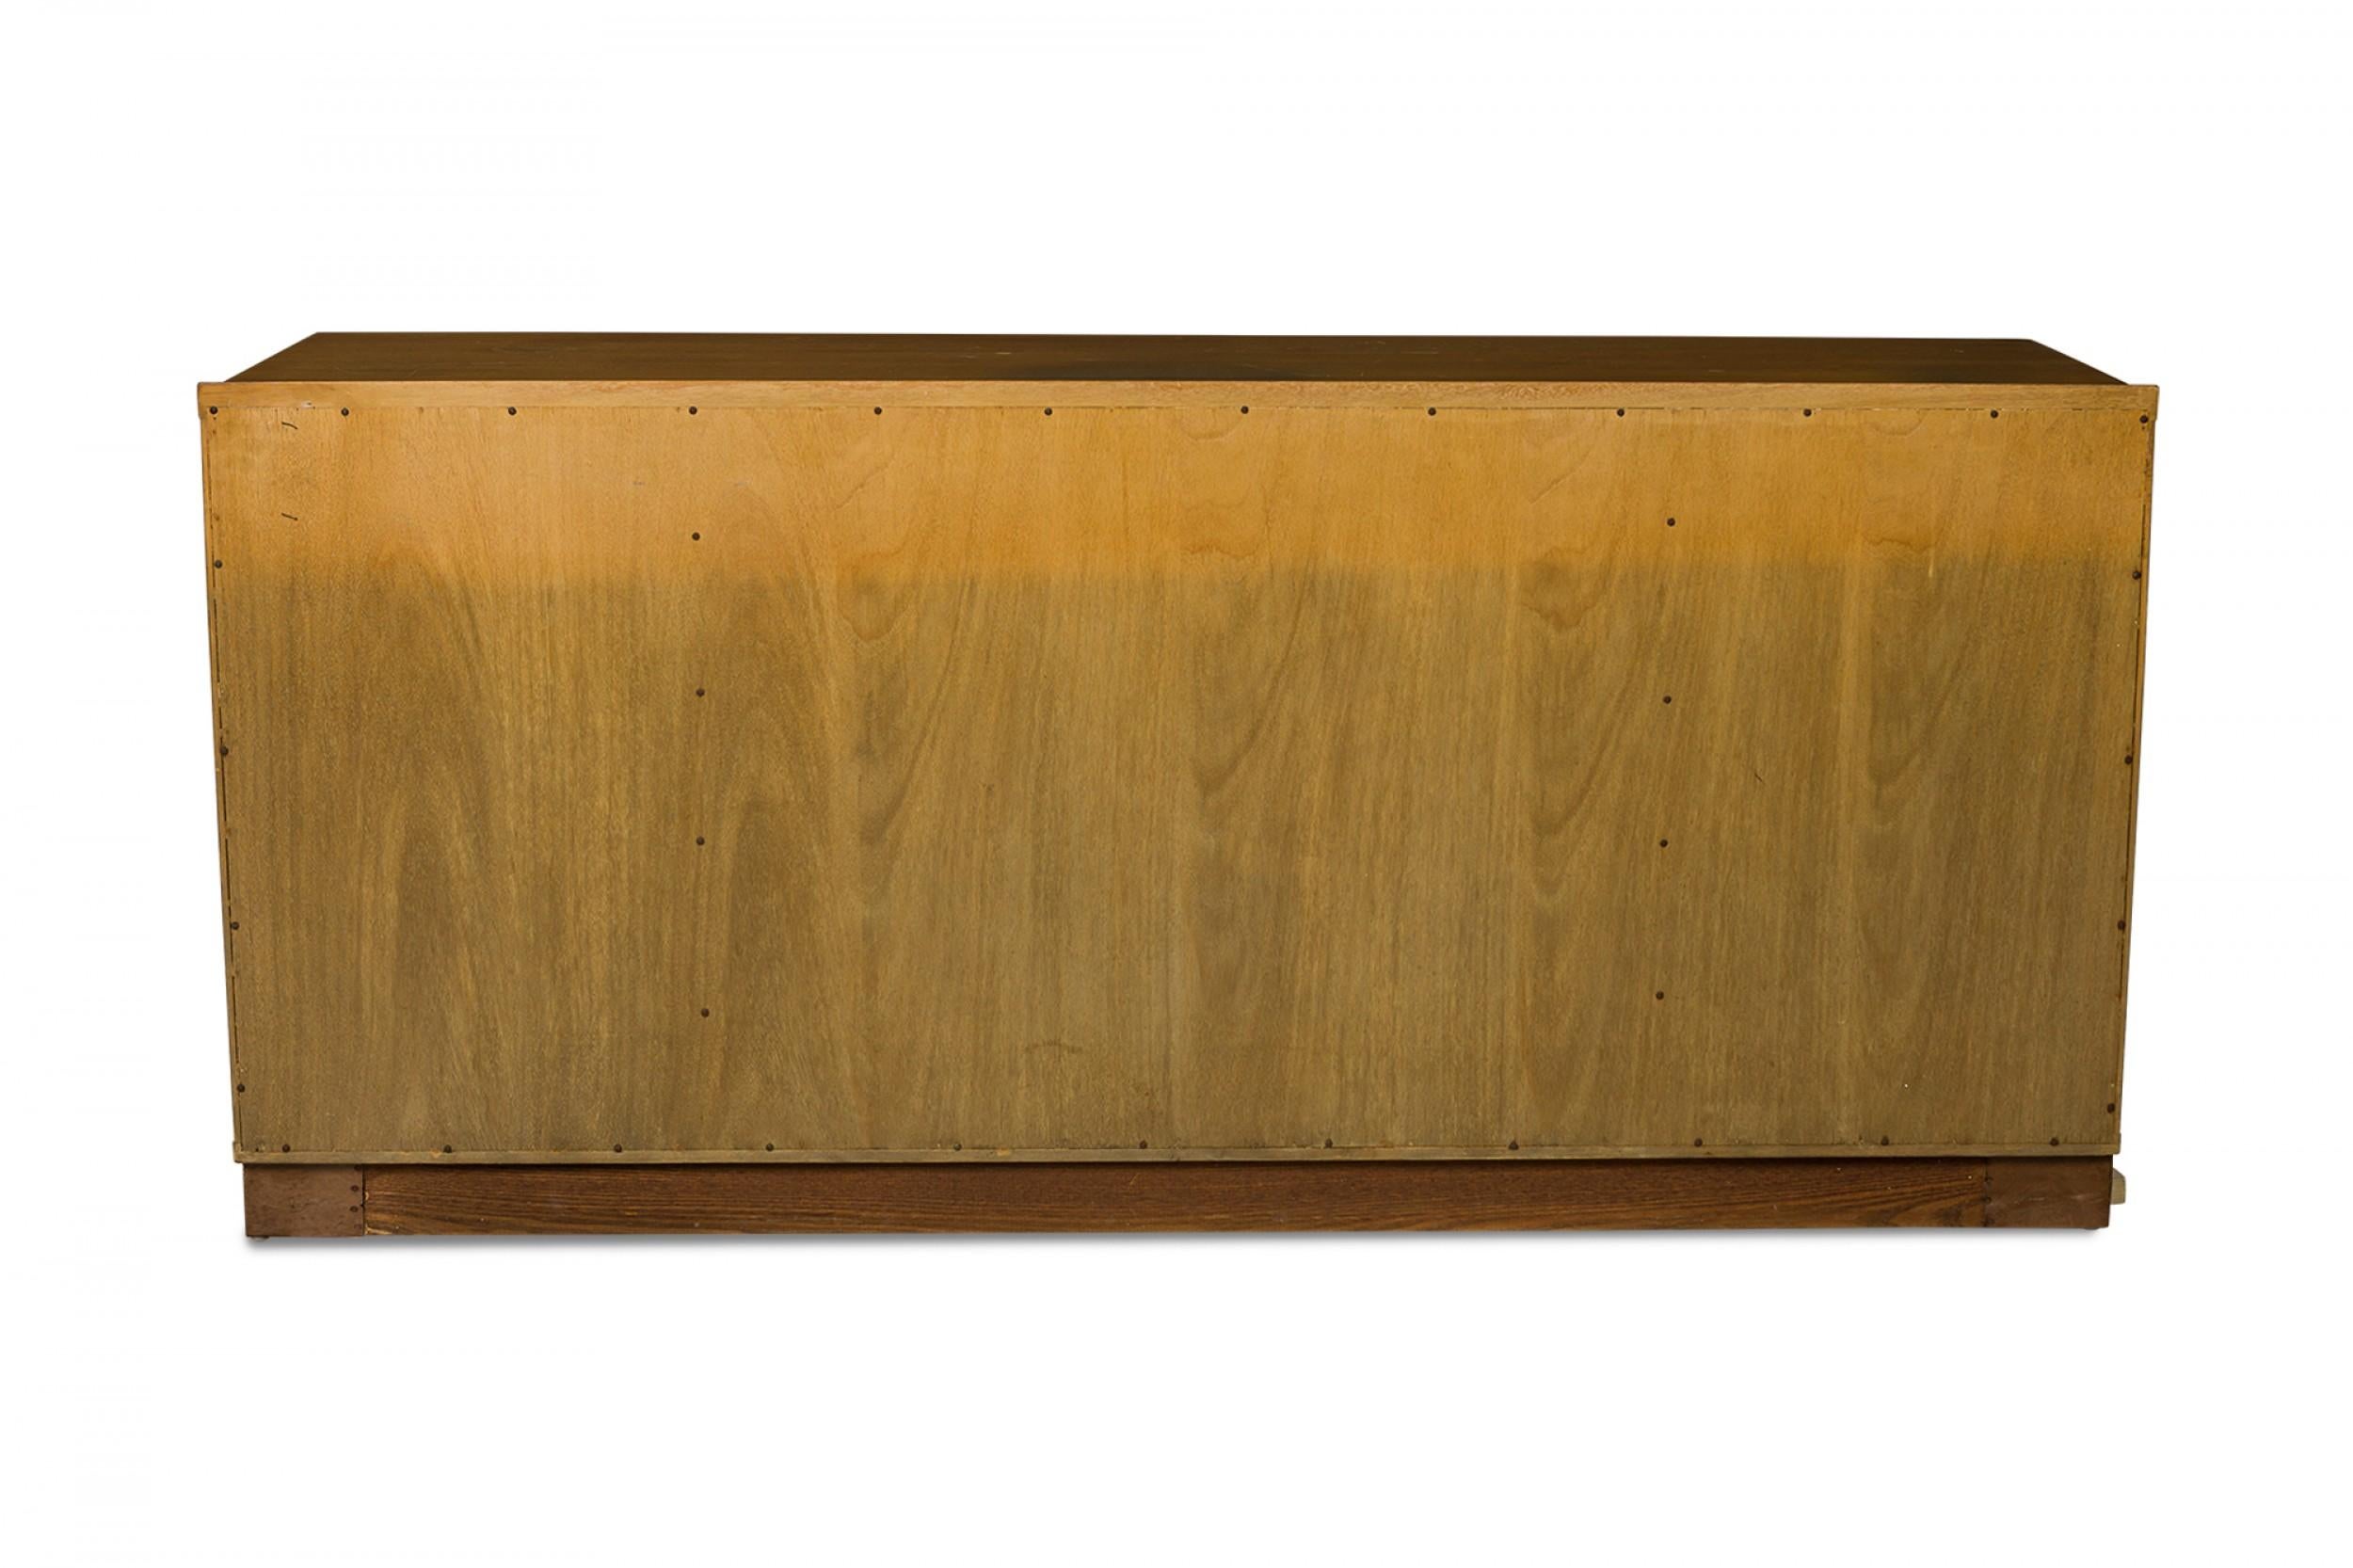 20th Century Edward Wormley for Dunbar Furniture Co. Walnut Low Chest of Drawers For Sale